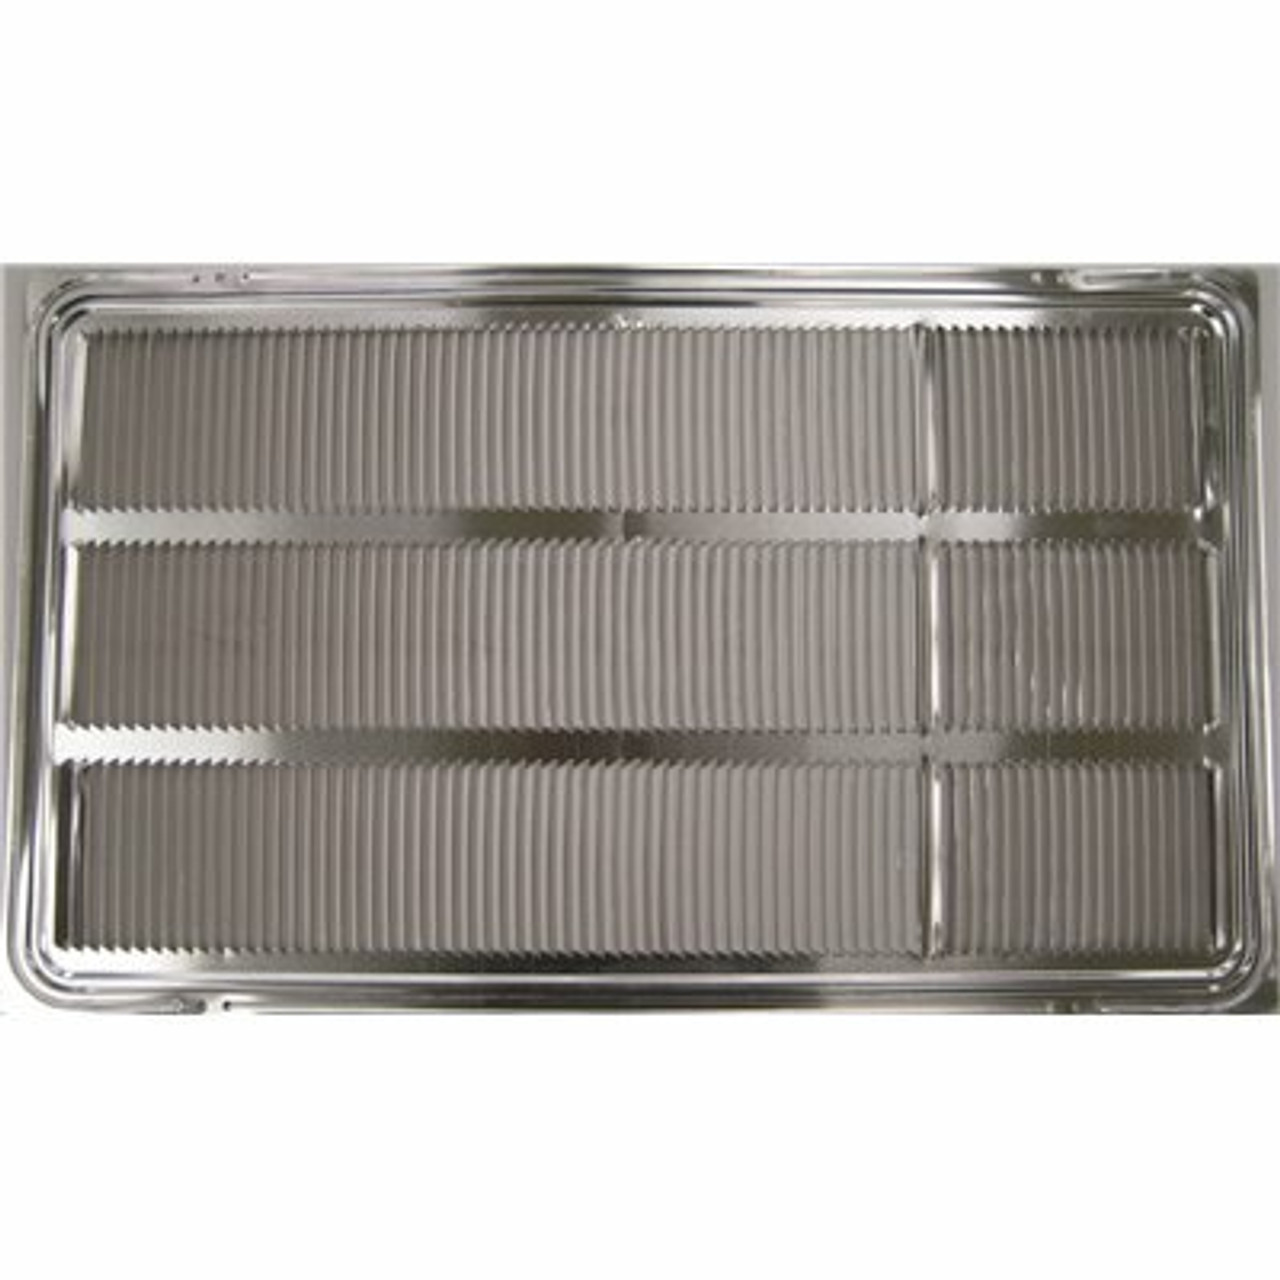 Lg Electronics Stamped Aluminum Grille For Lg Built-In Air Conditioner